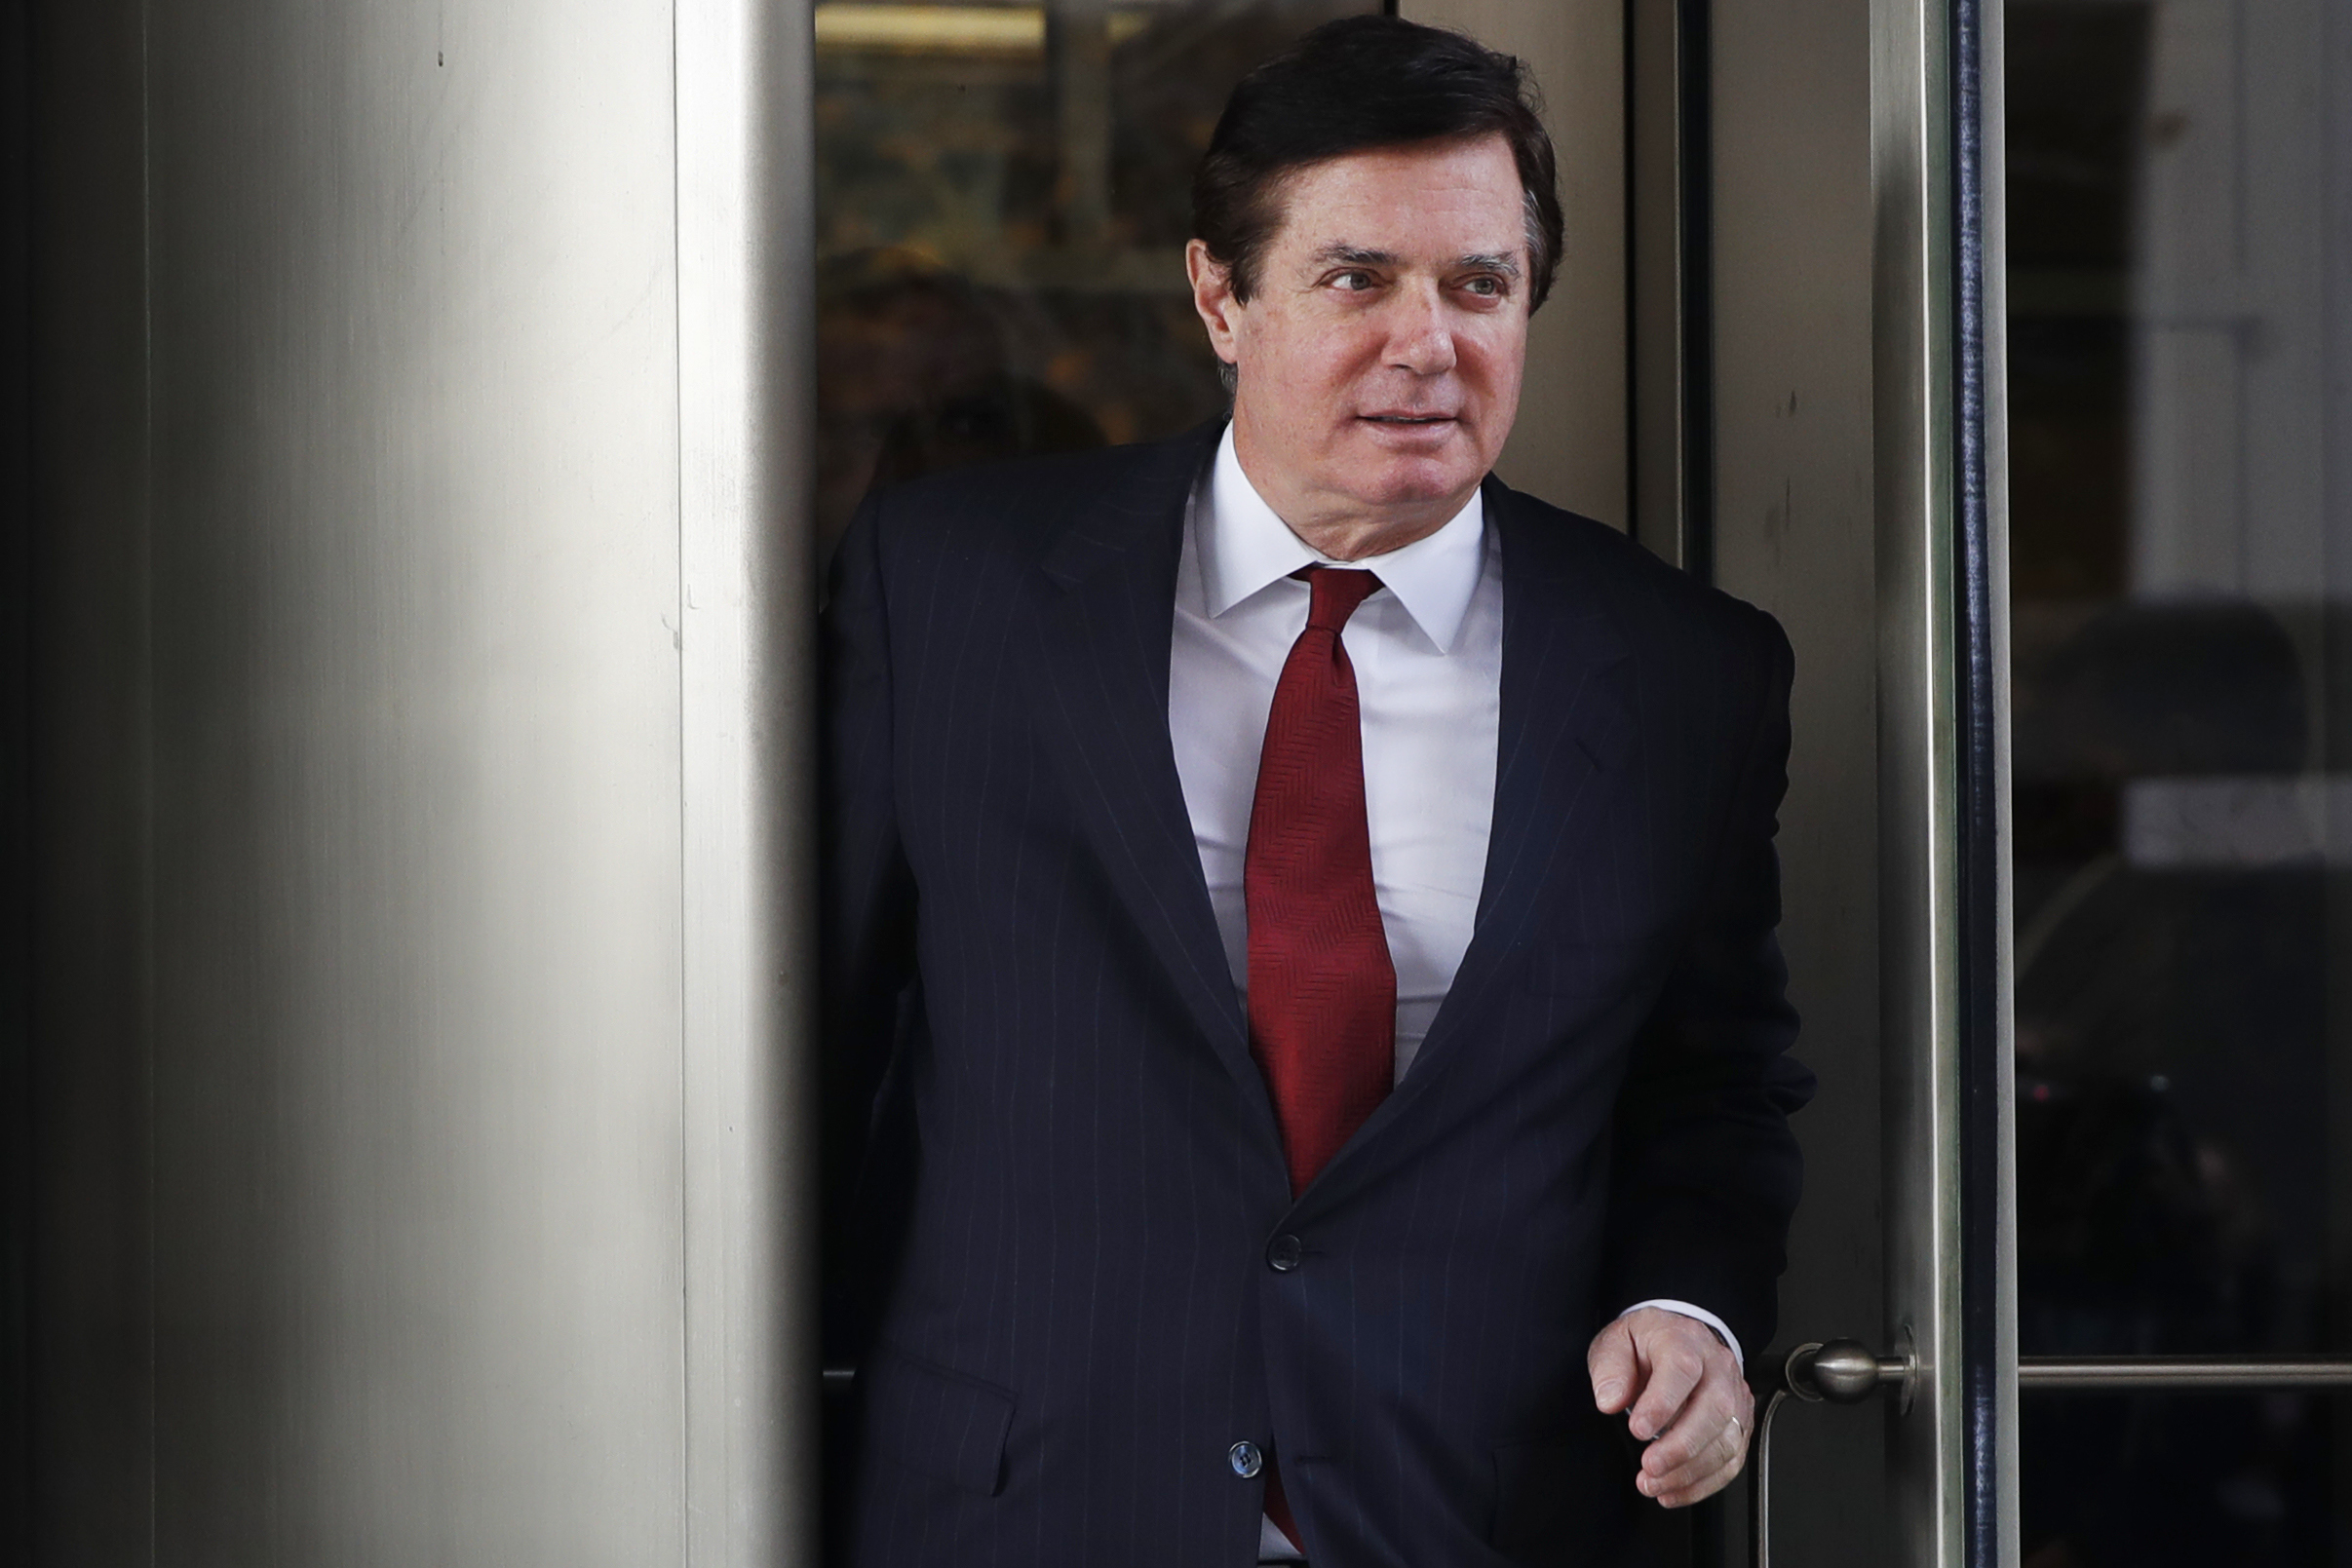 Paul Manafort, President Donald Trump's former campaign chairman, leaves the federal courthouse in Washington, Nov. 6, 2017. He has struggled to pay his bail of $10 million.